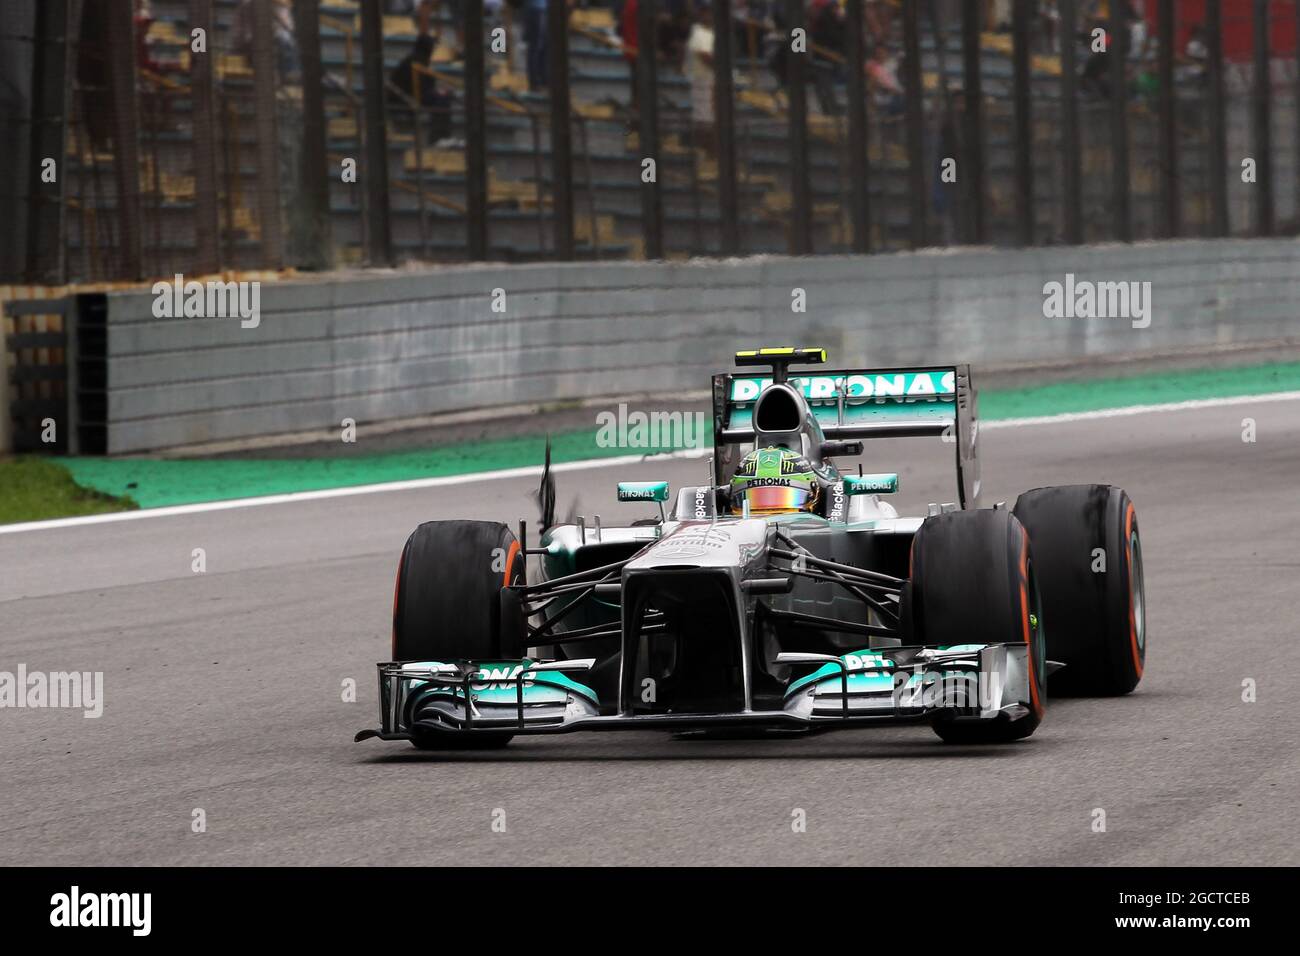 Mercedes amg f1 w04 punctured rear tyre after contact valtteri hi-res ...